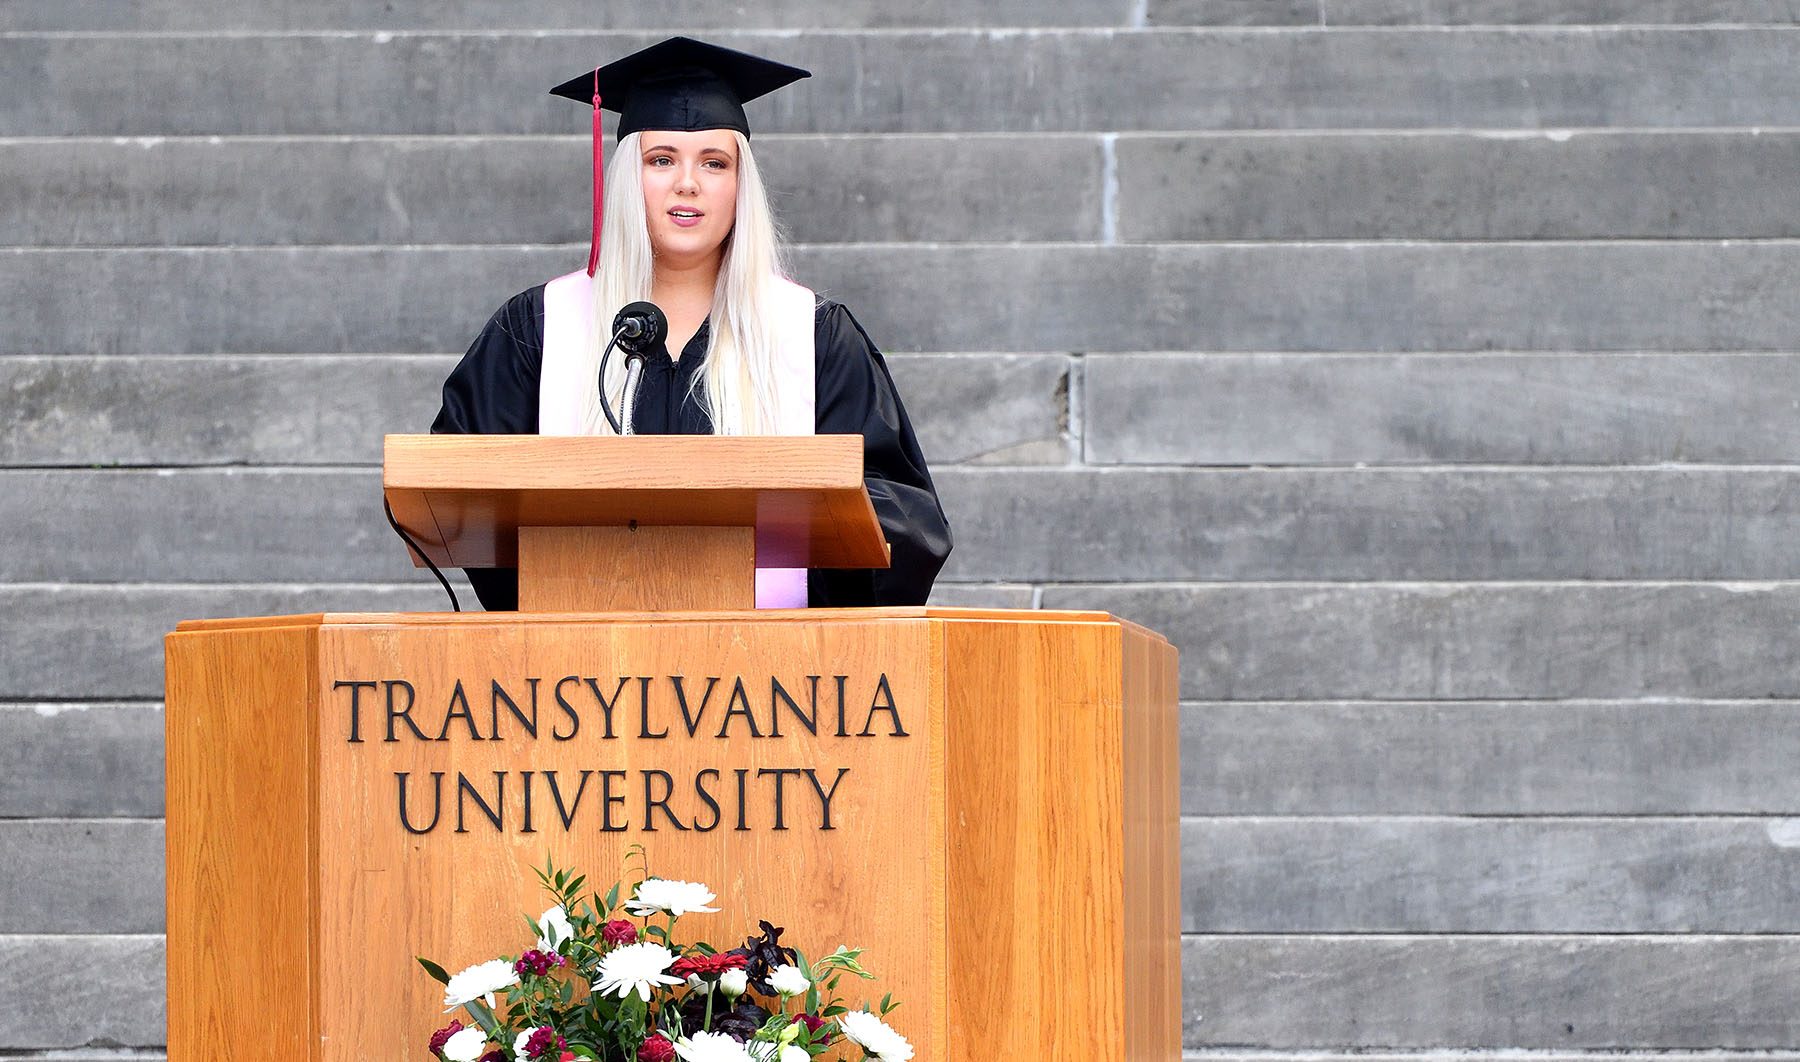 Neuroscience major gives 2019 commencement address with younger people in mind